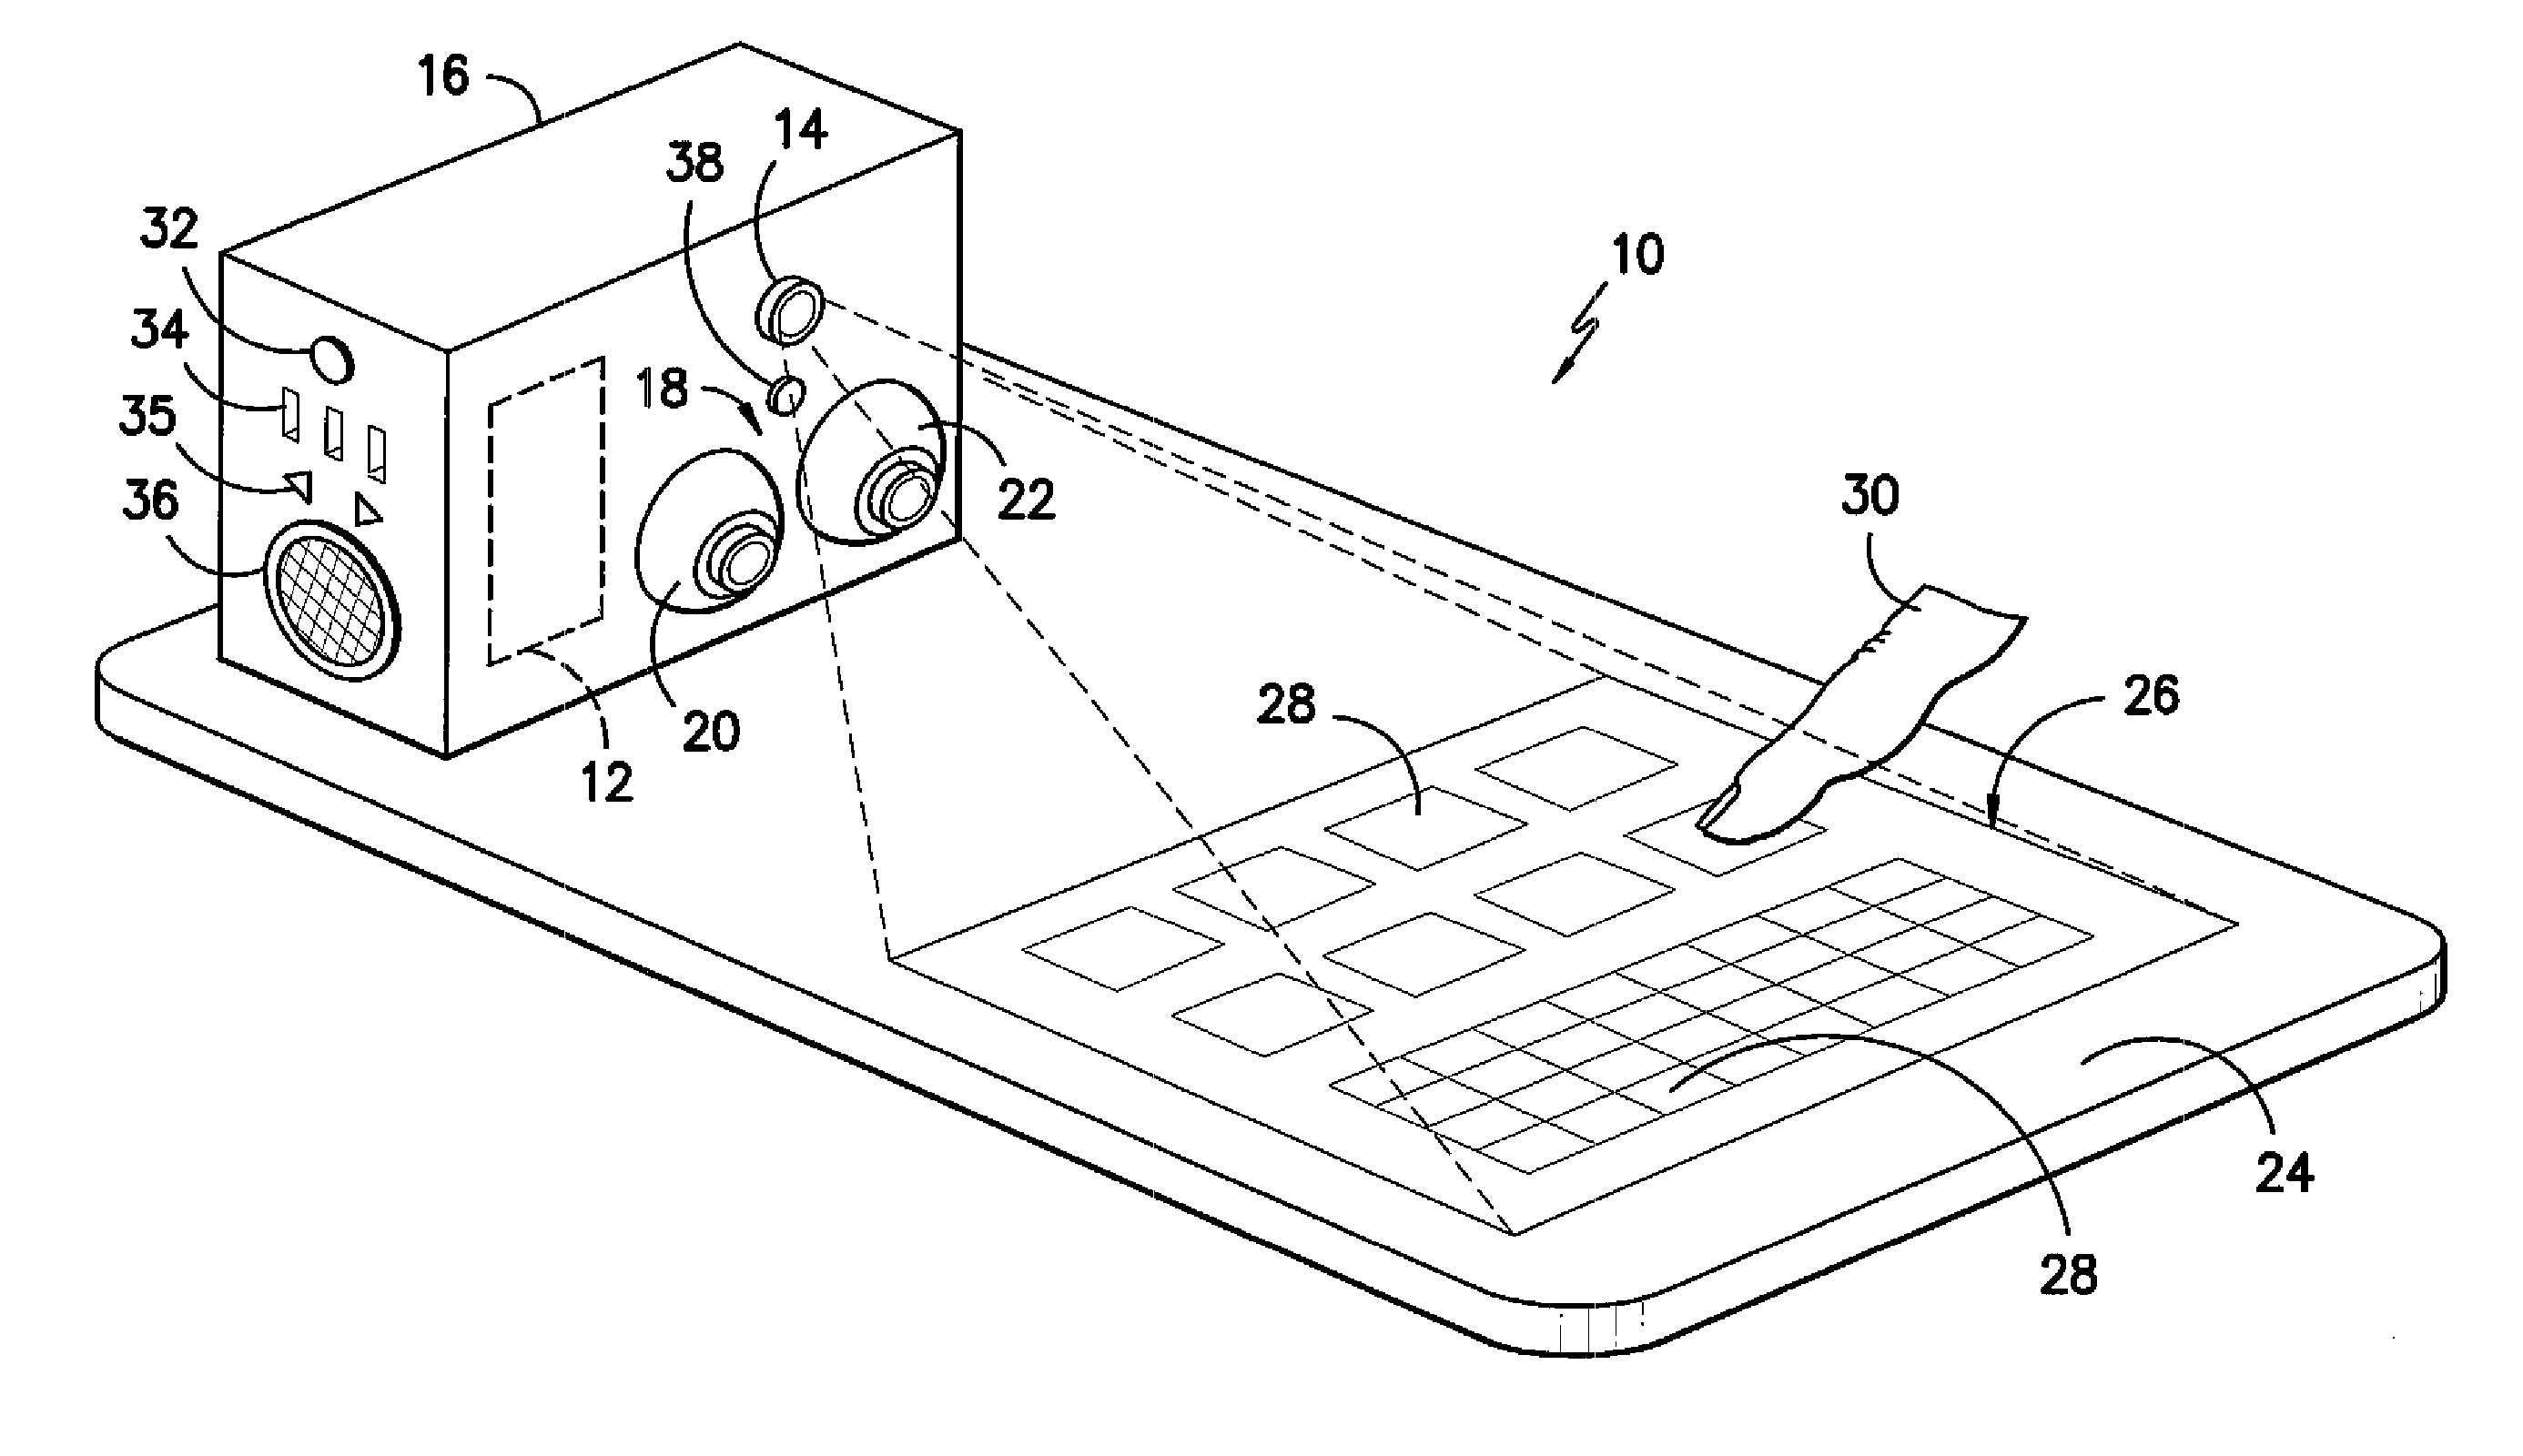 Speech generation device with a projected display and optical inputs